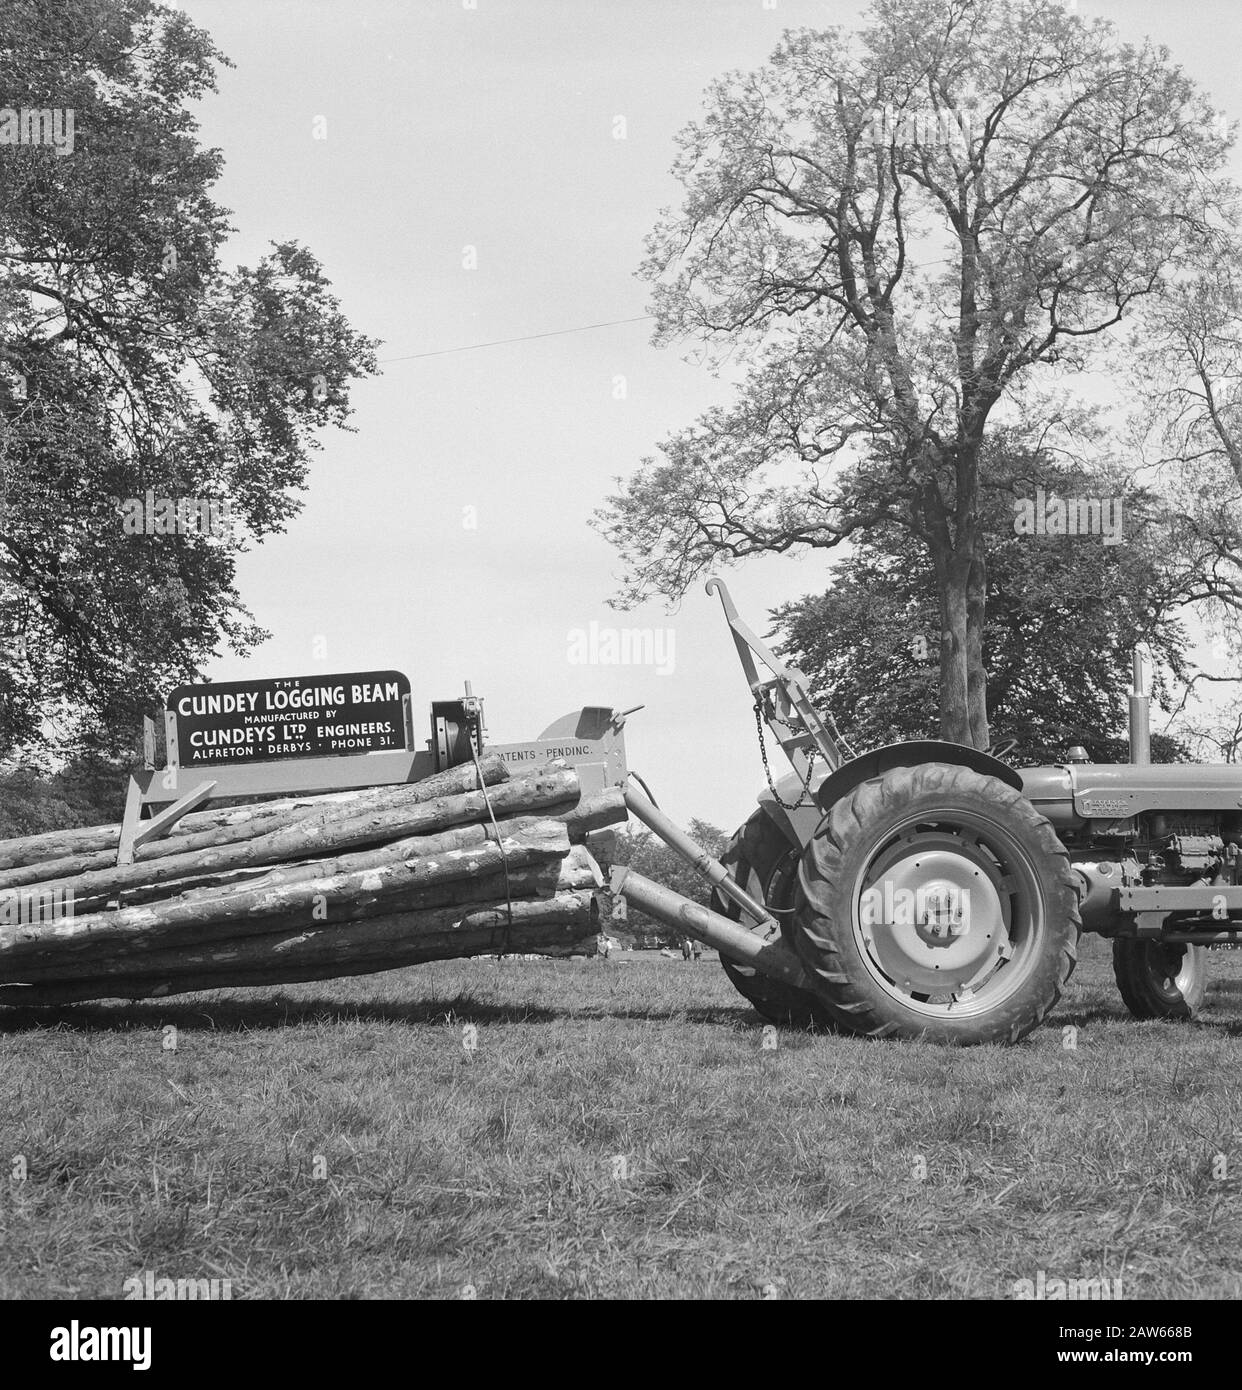 machinery, equipment, information panels, trunks, Tractors Date: undated Keywords: trunks, information, machinery, tools Person Name: Tractor Stock Photo